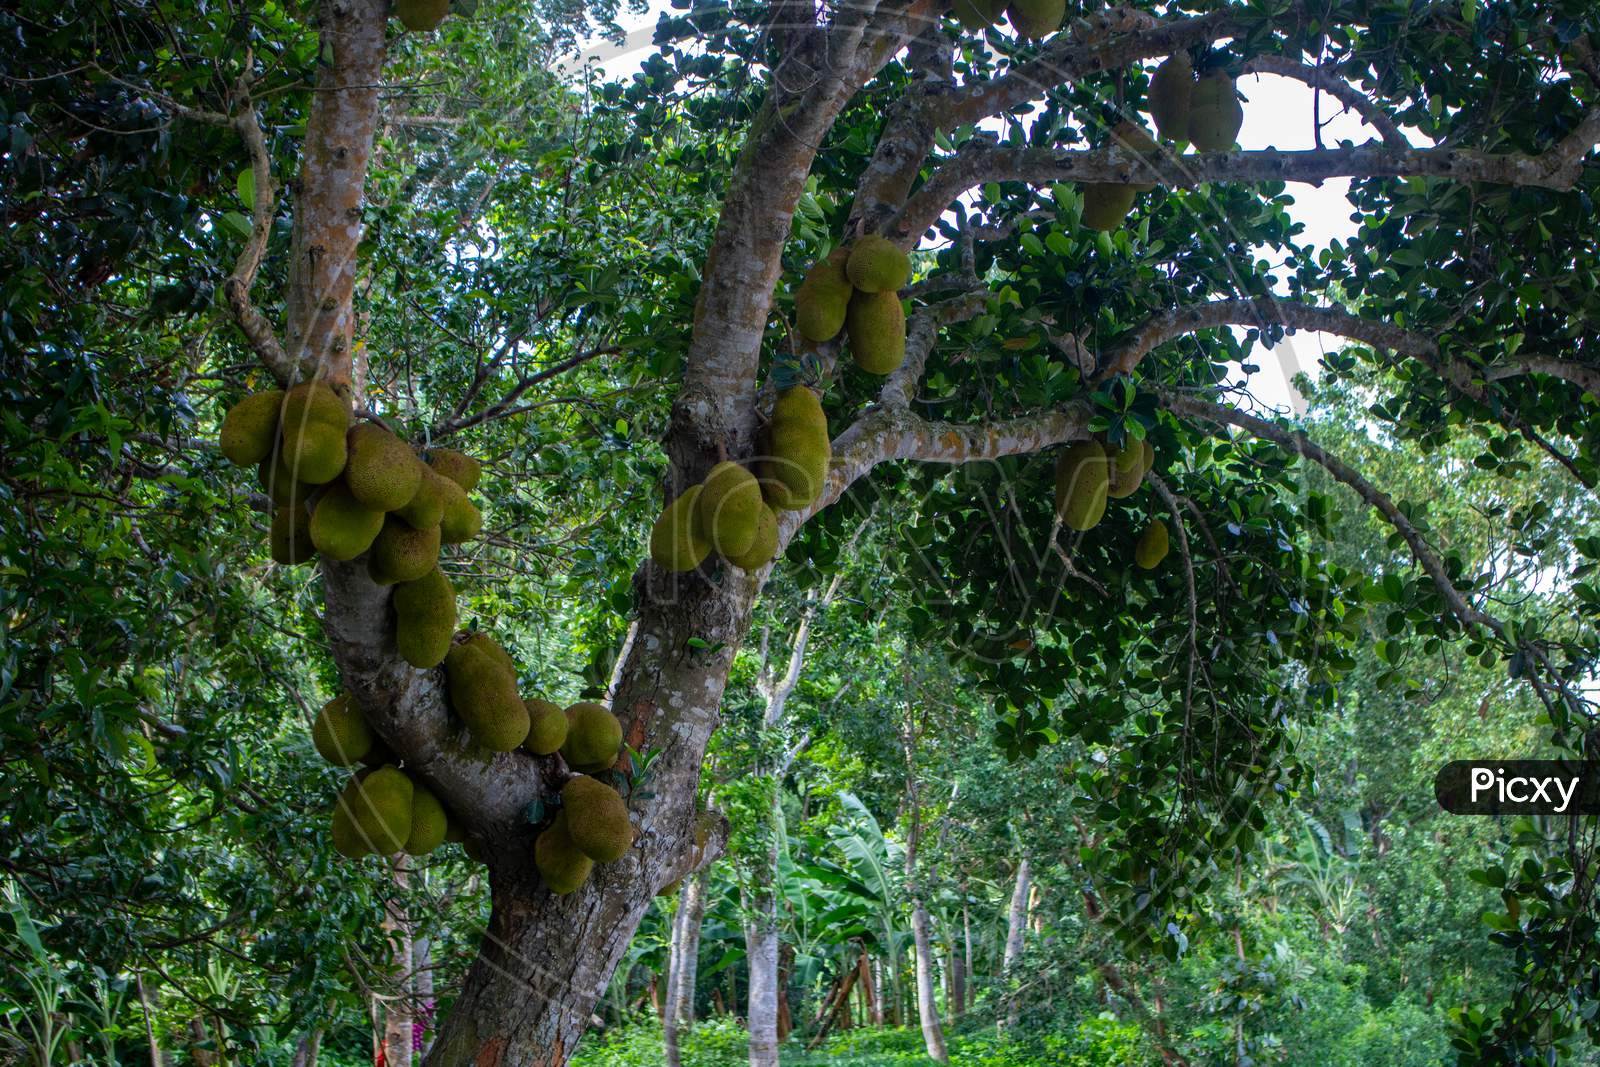 There Are Innumerable Jackfruits On The Tree. It Is The National Fruit Of Bangladesh.